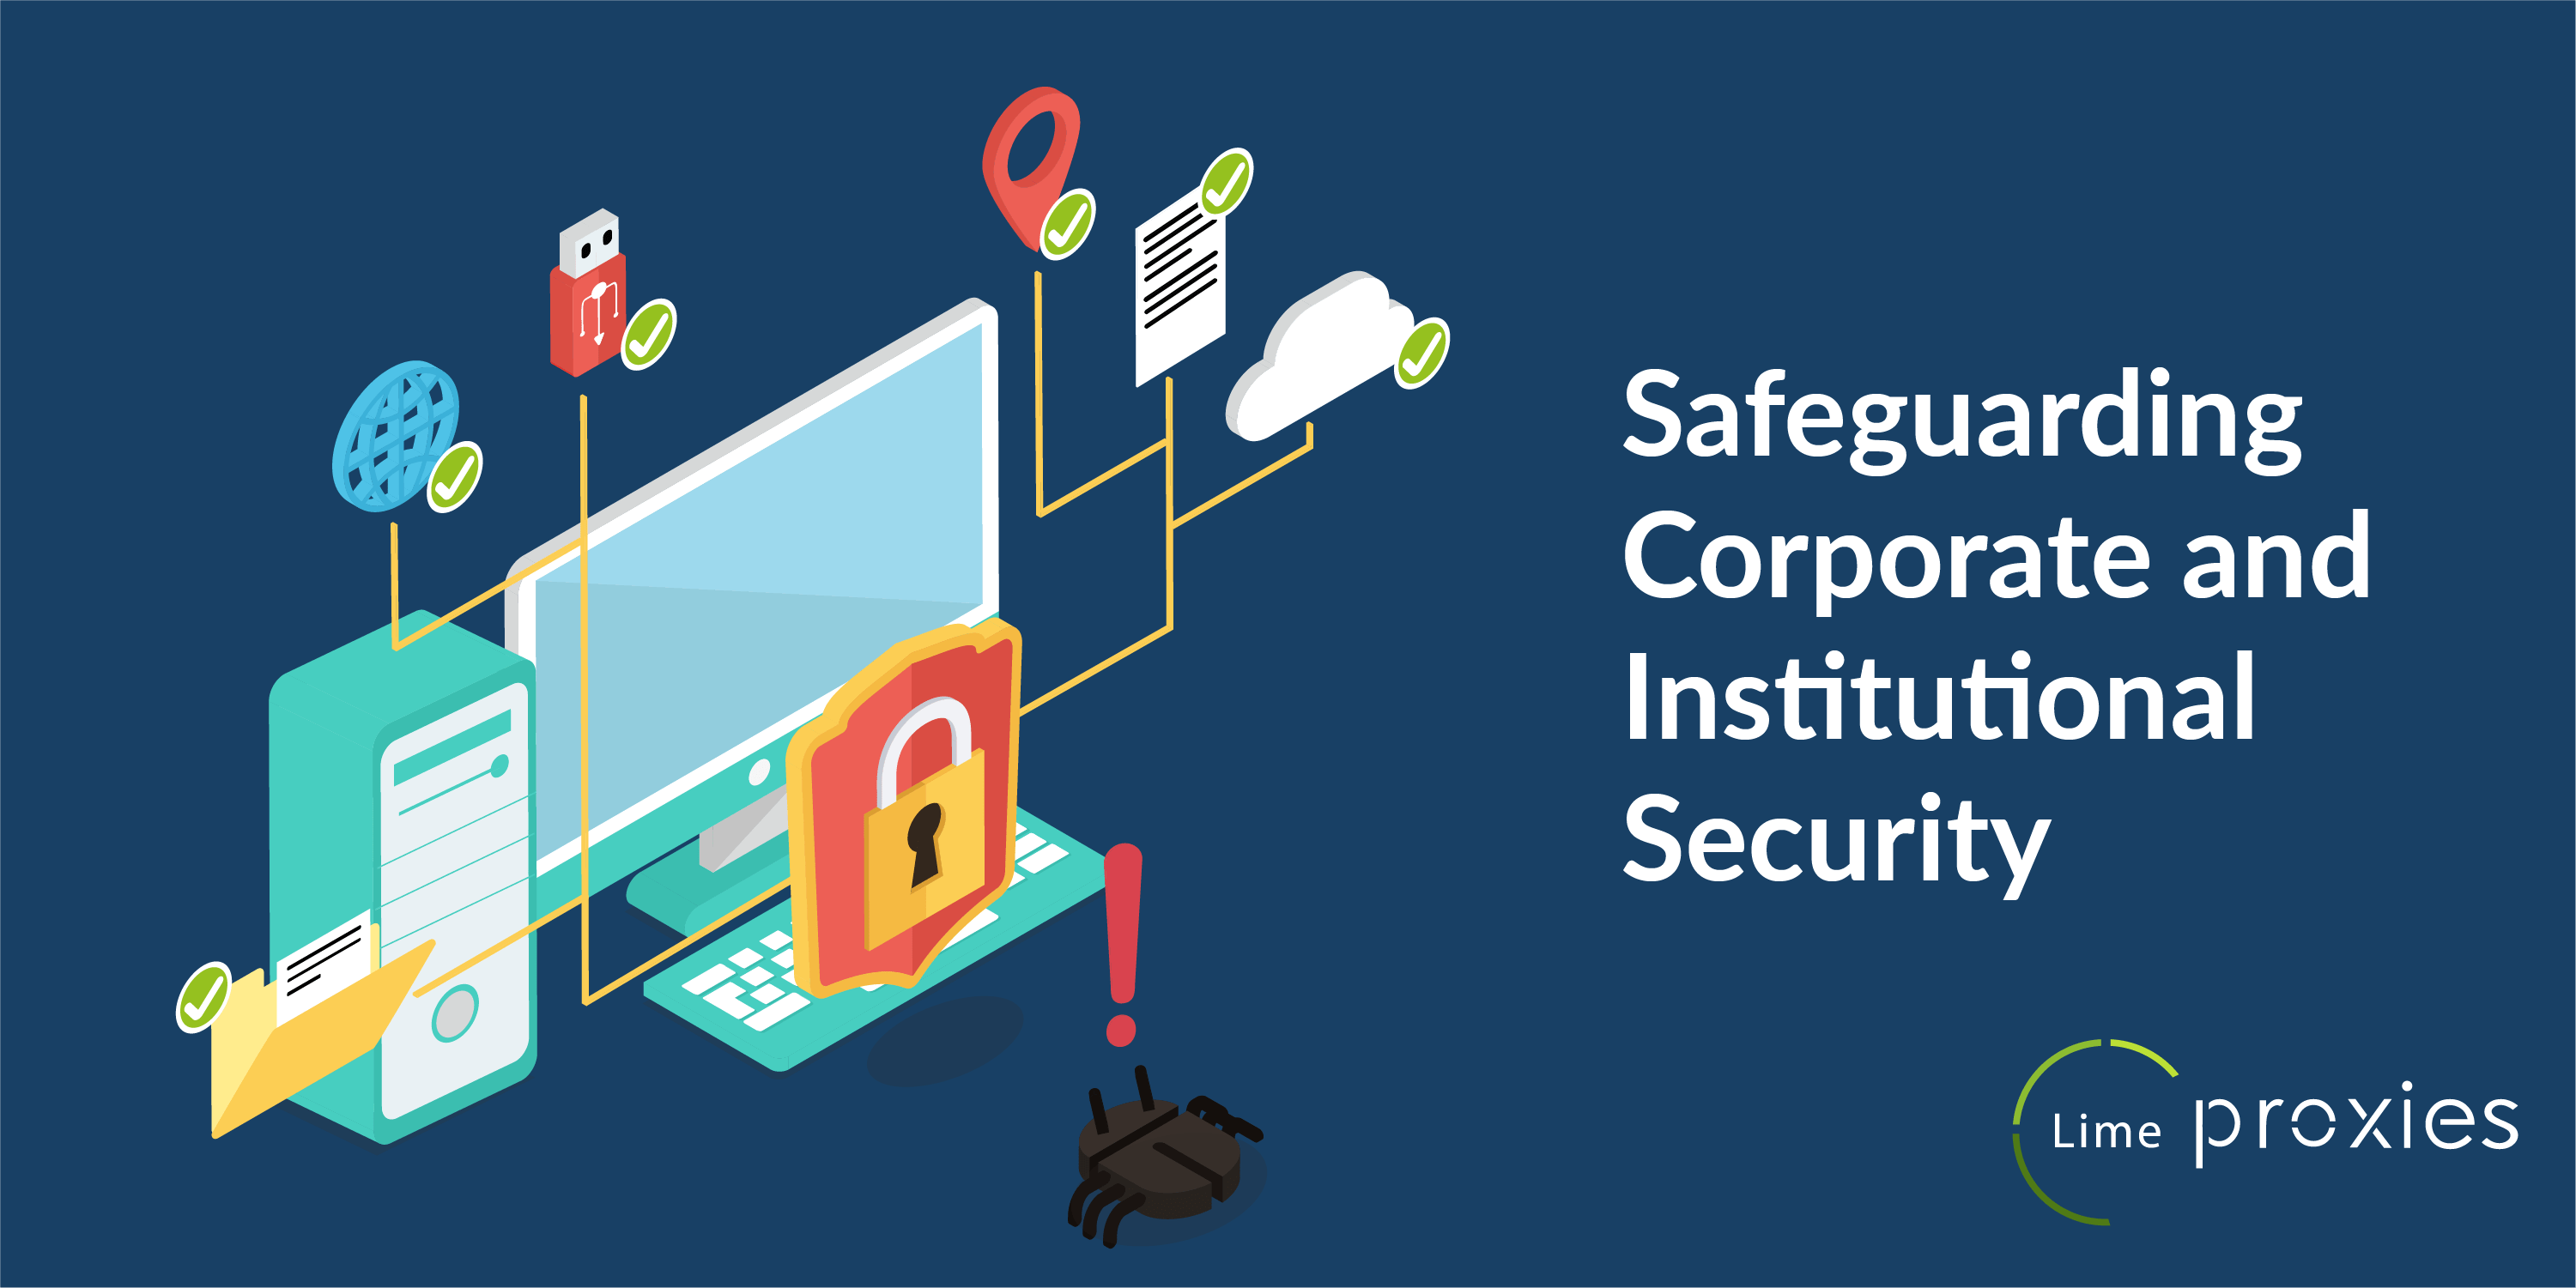 SAFEGUARDING CORPORATE AND INSTITUTIONAL SECURITY